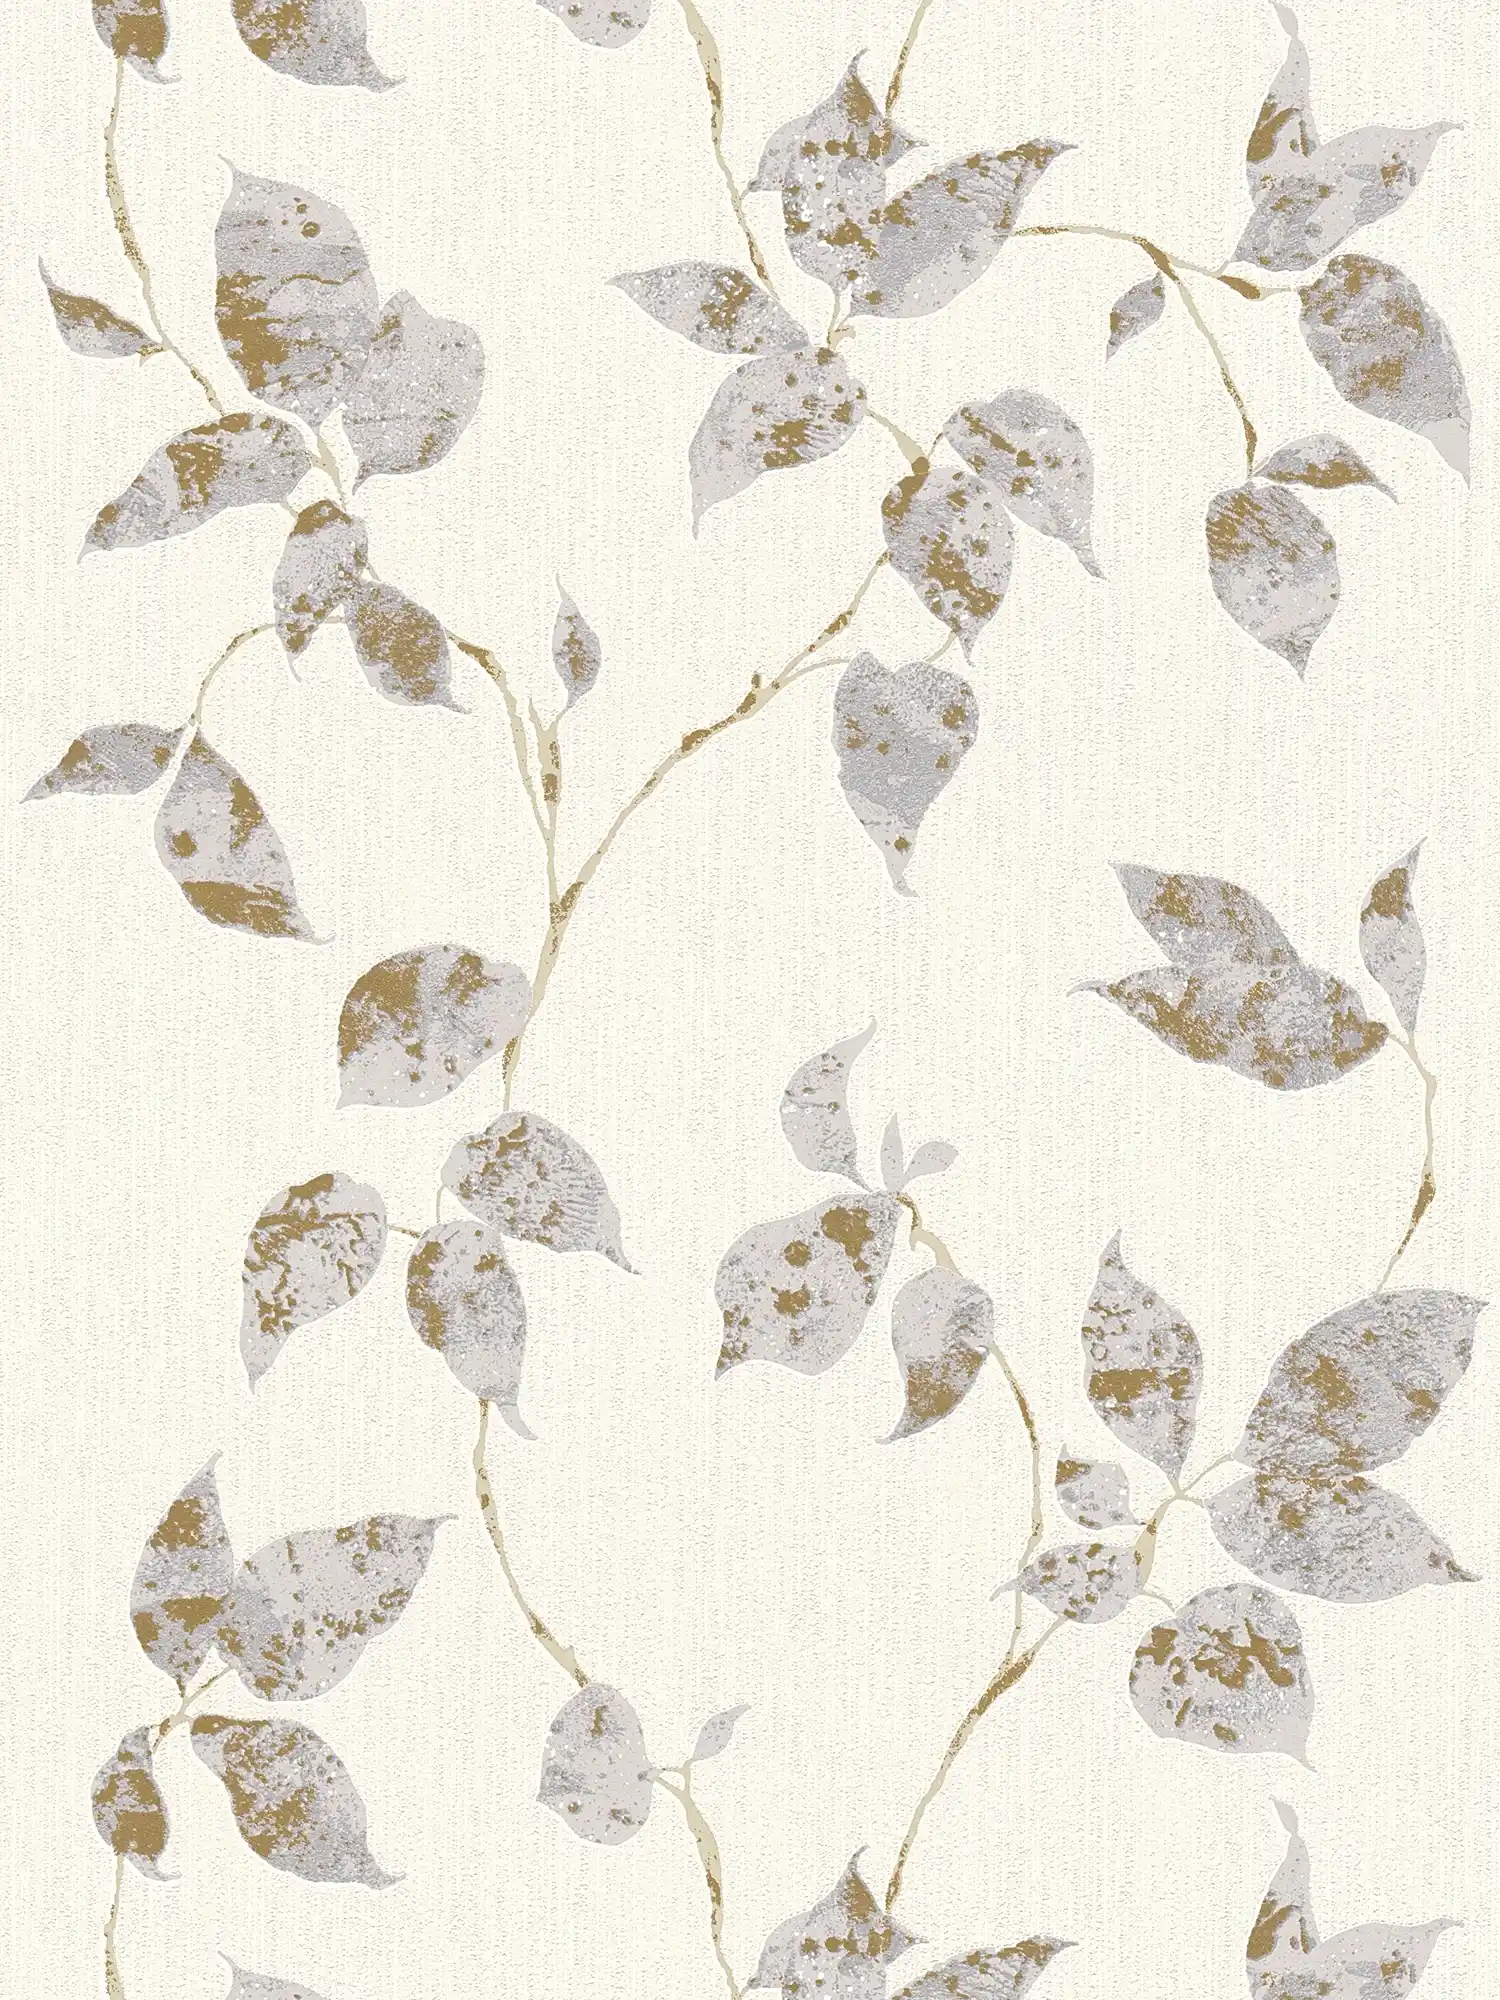 Textured Wallpaper with Leaf Tendrils & Metallic Accent - Grey, White
